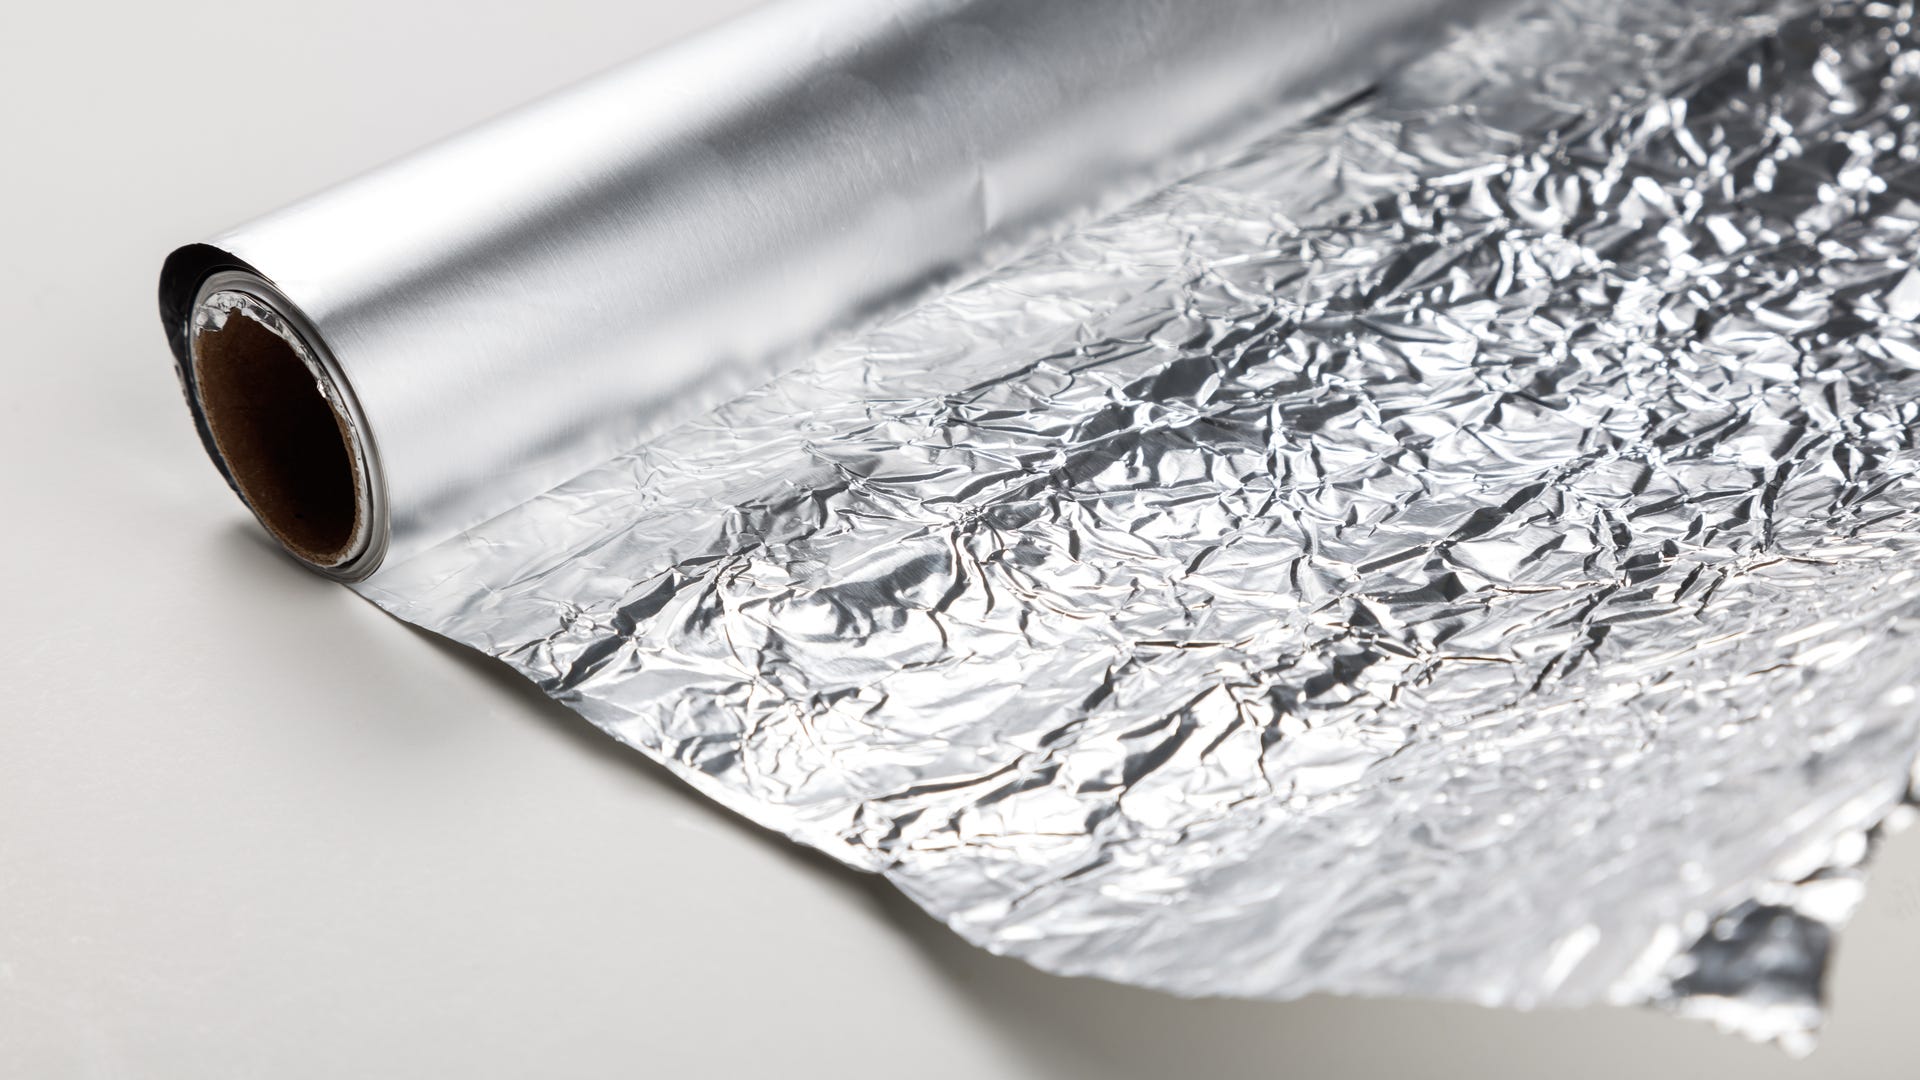 how is aluminum foil made and why is aluminum foil shiny on one side and dull on the other